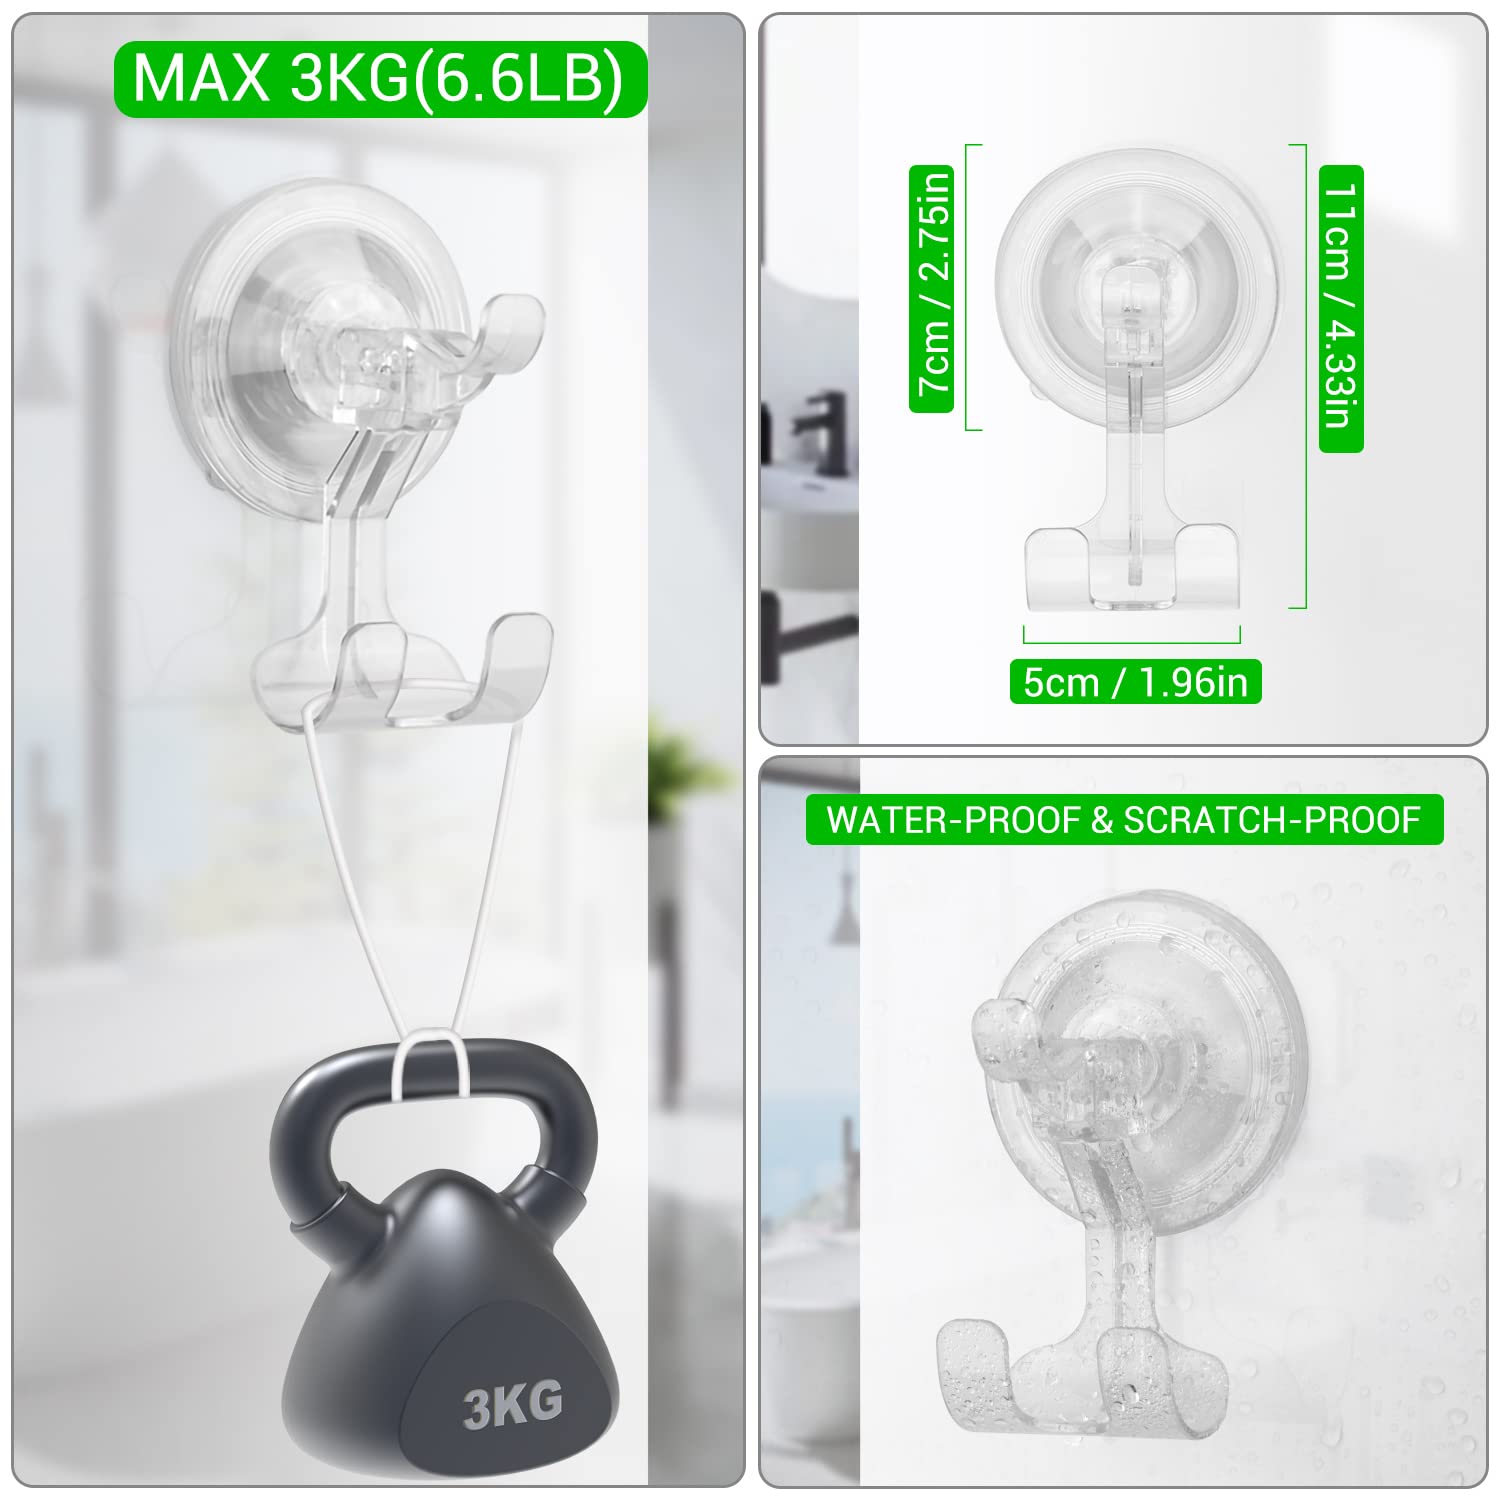 LUXEAR Shower Suction Hooks, Suction Cup Shower Razor Holder Reusable Removable Waterproof Suction Cup Hooks for Bathroom Livingroom Kitchen Towel Razor hanger 2 Pack - image 4 of 9